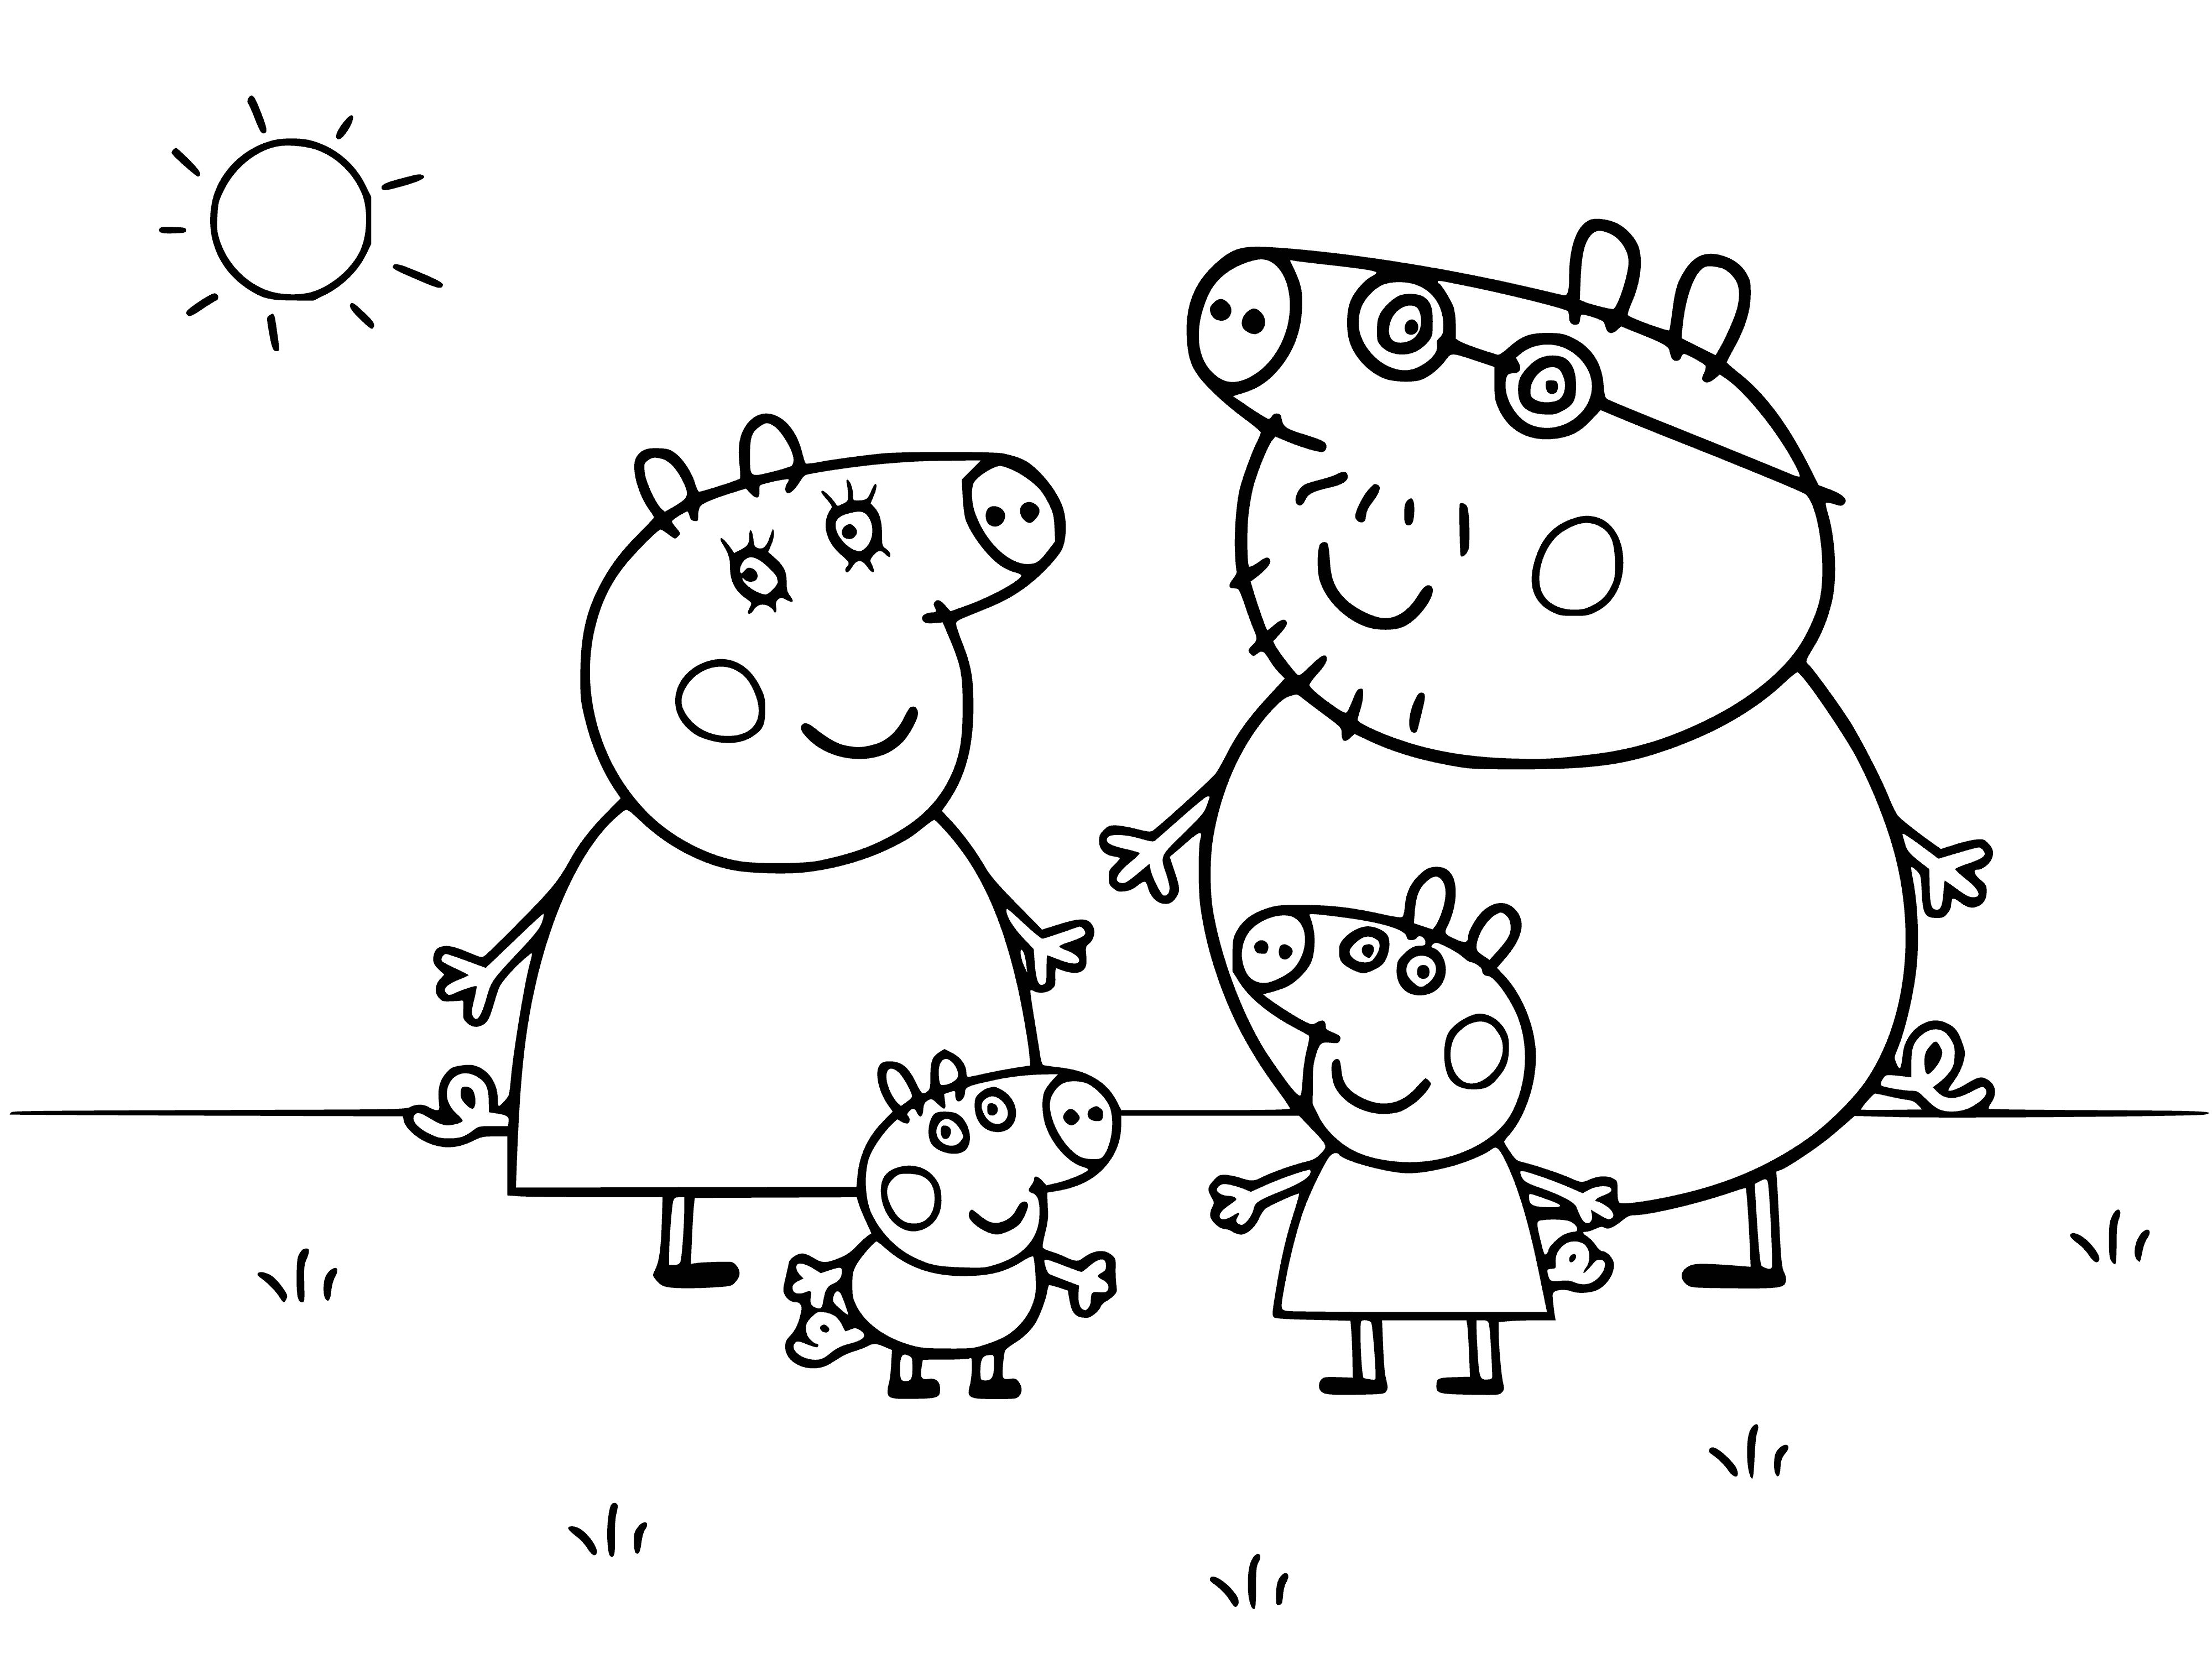 A family of pigs on a walk coloring page